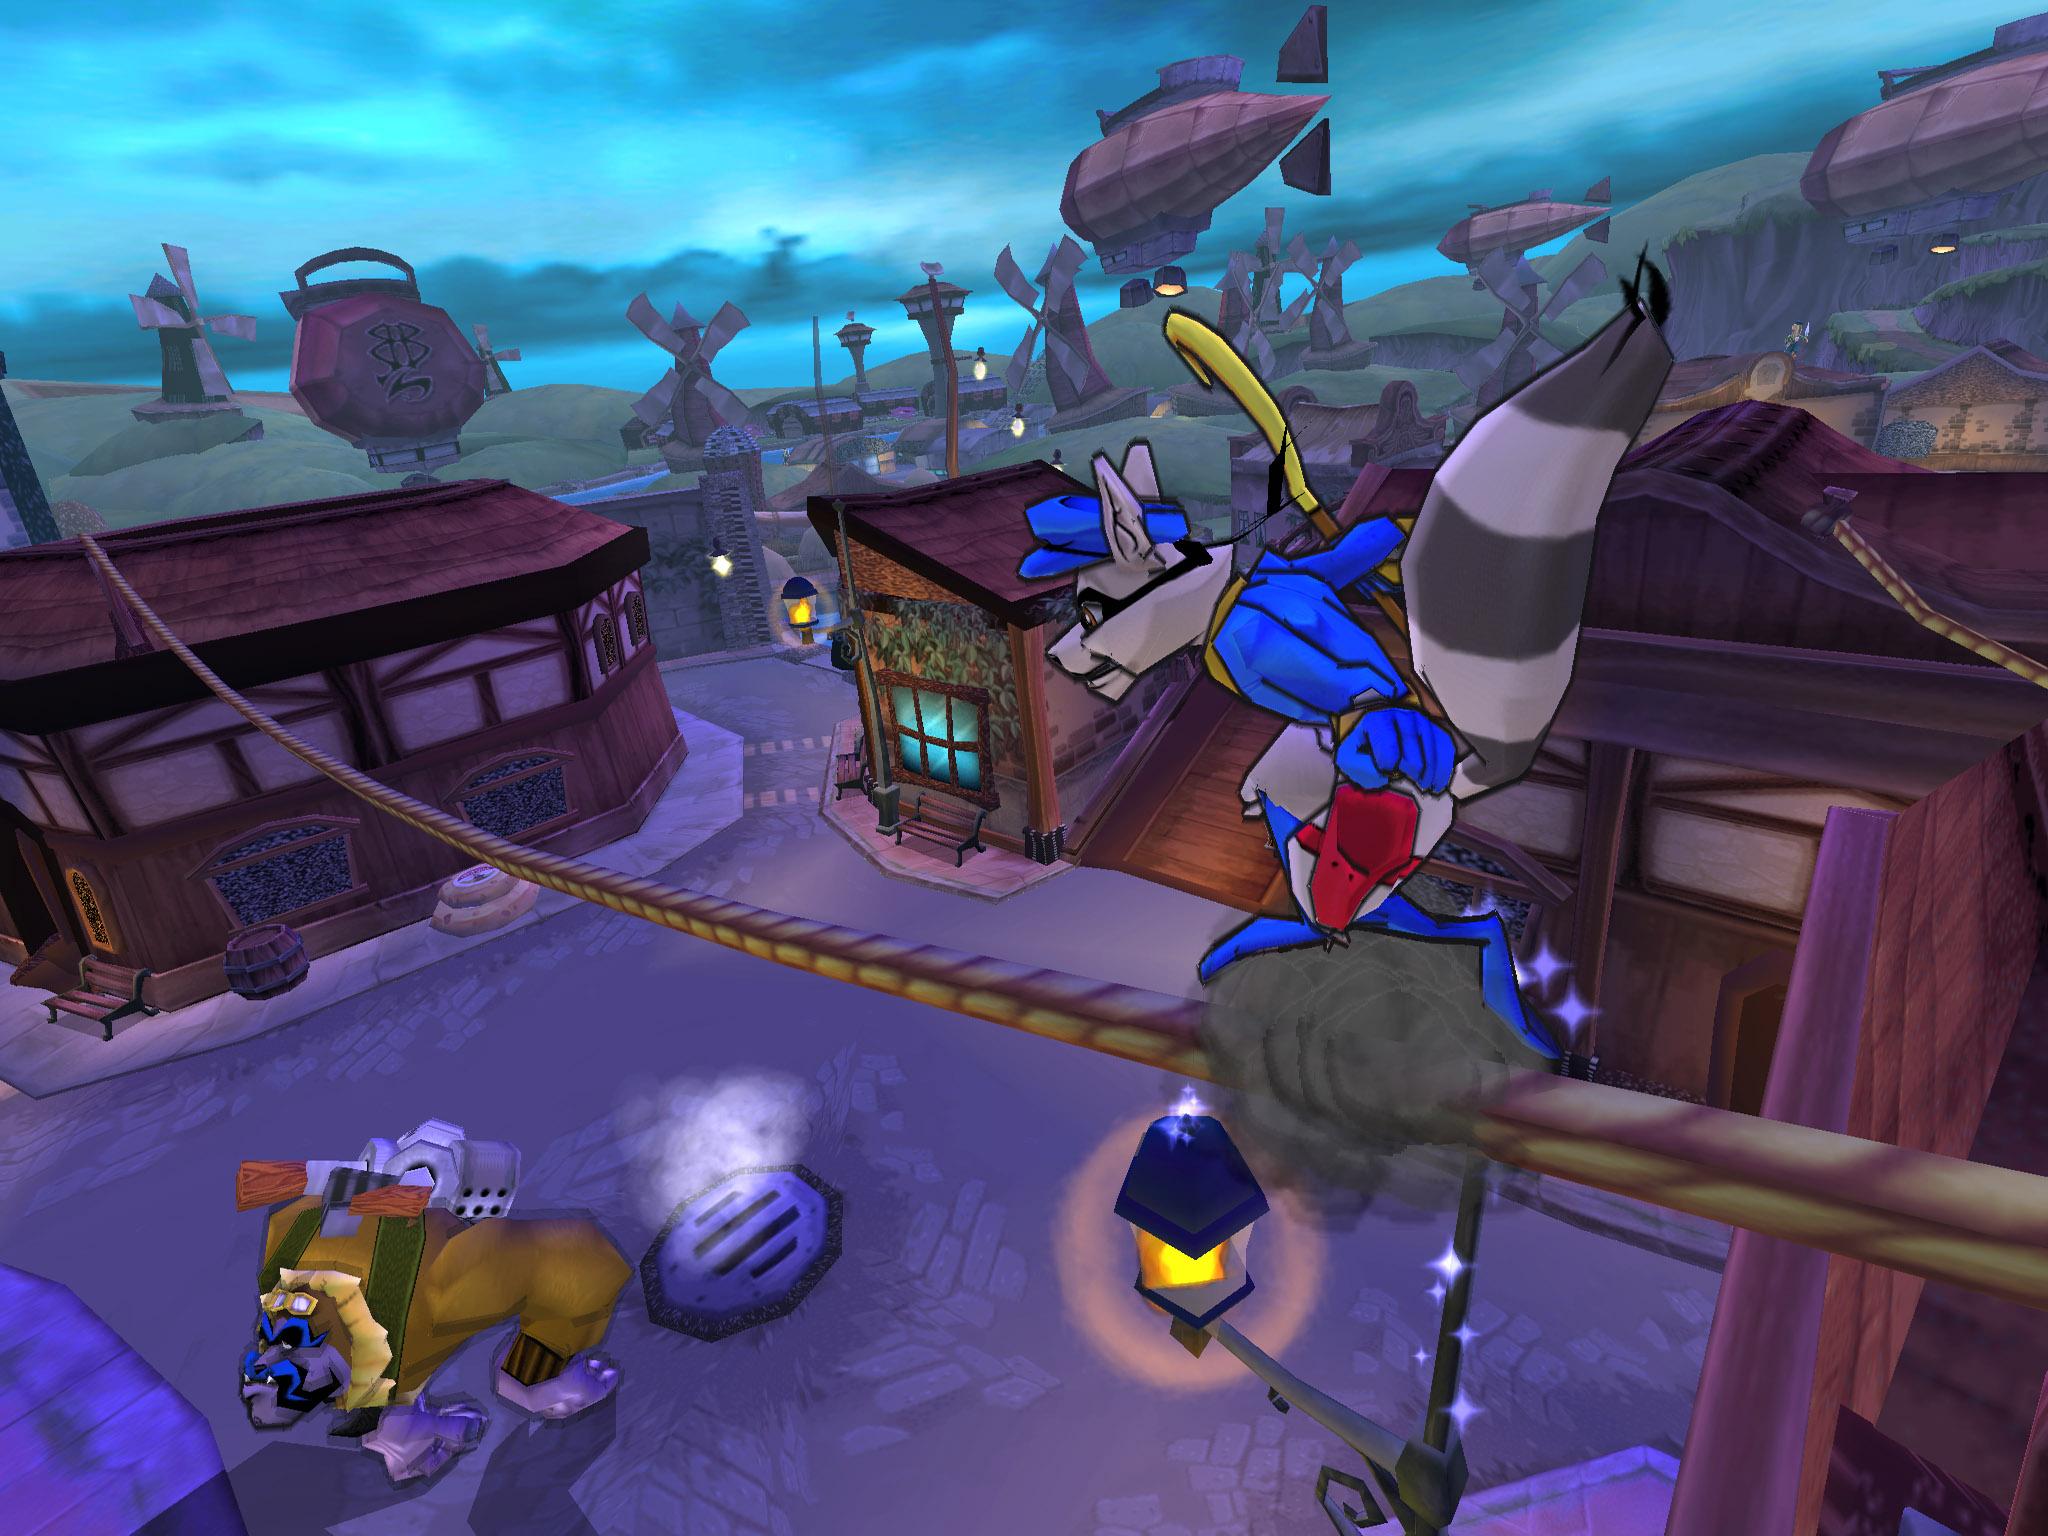 Sly Cooper Trilogy (PS2)